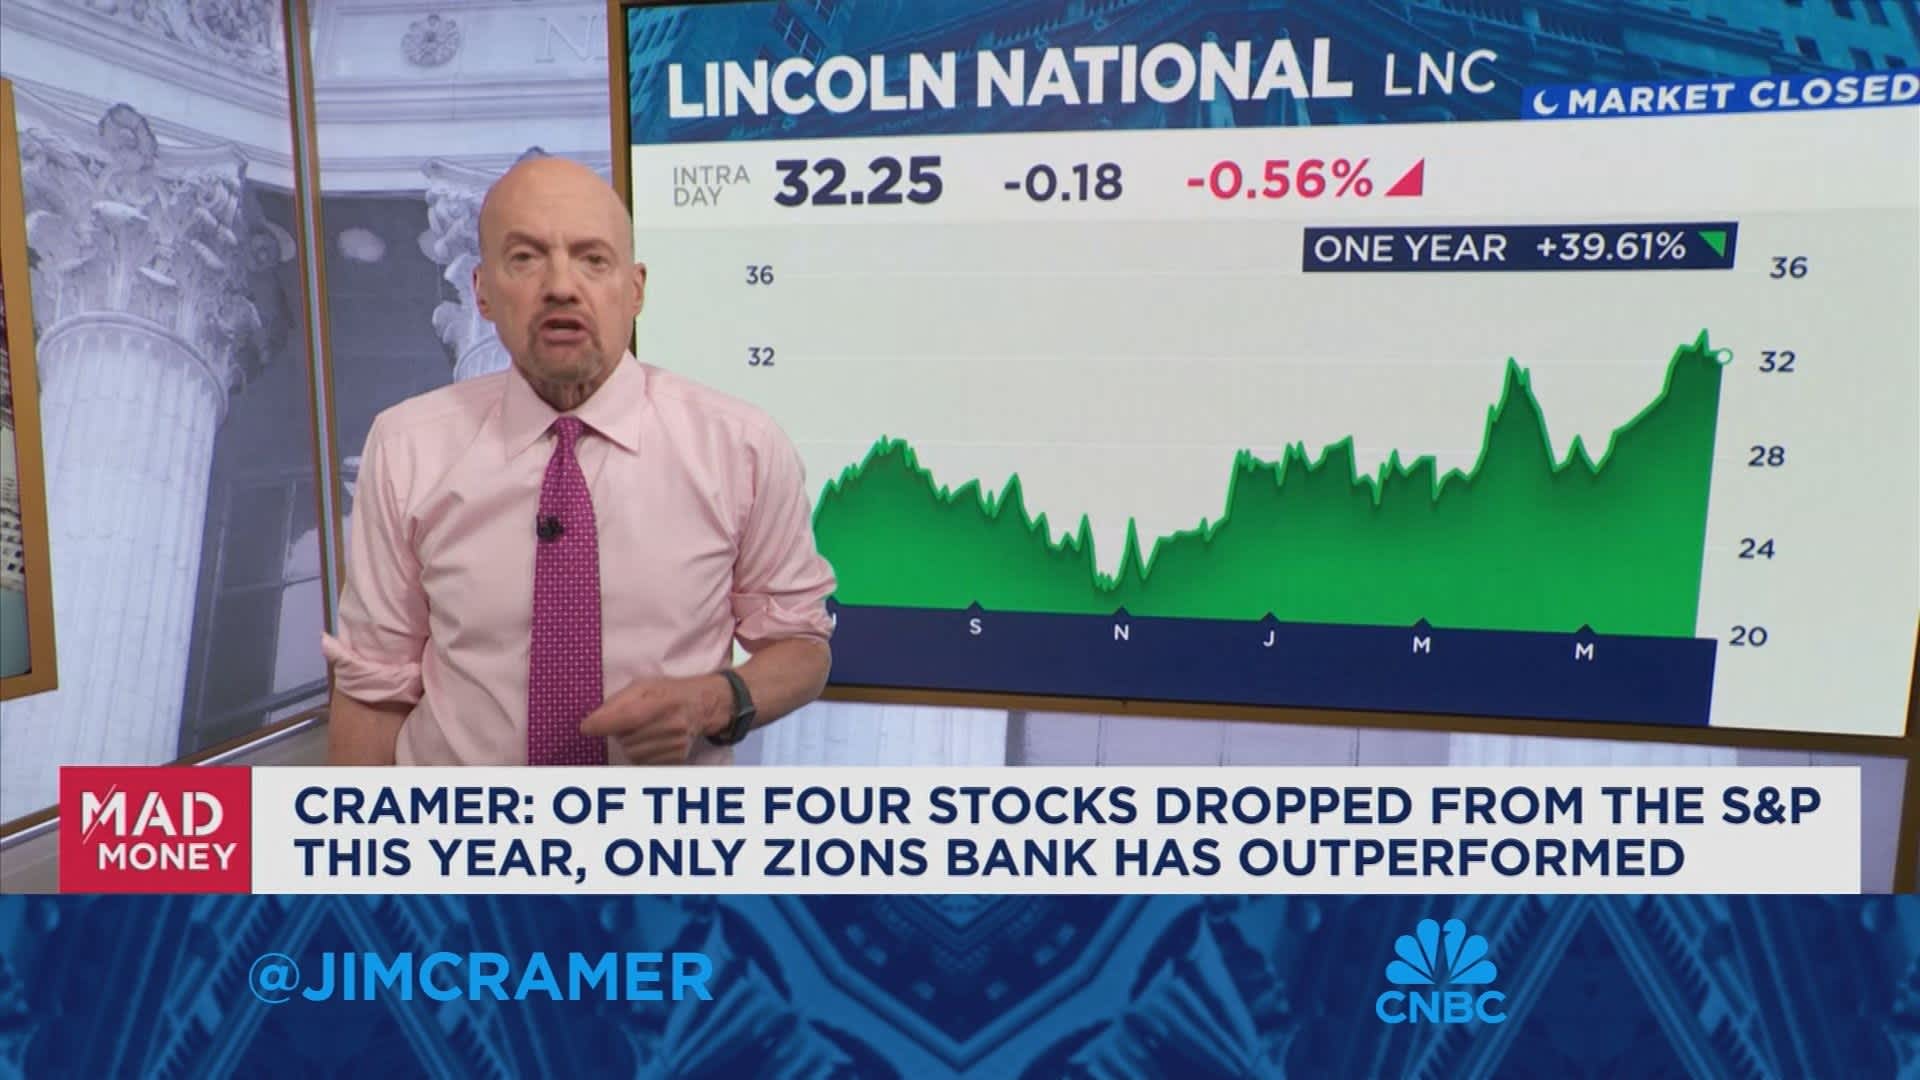 Of the four stocks dropped from the S&P this year only Zions Bank outperformed, says Jim Cramer